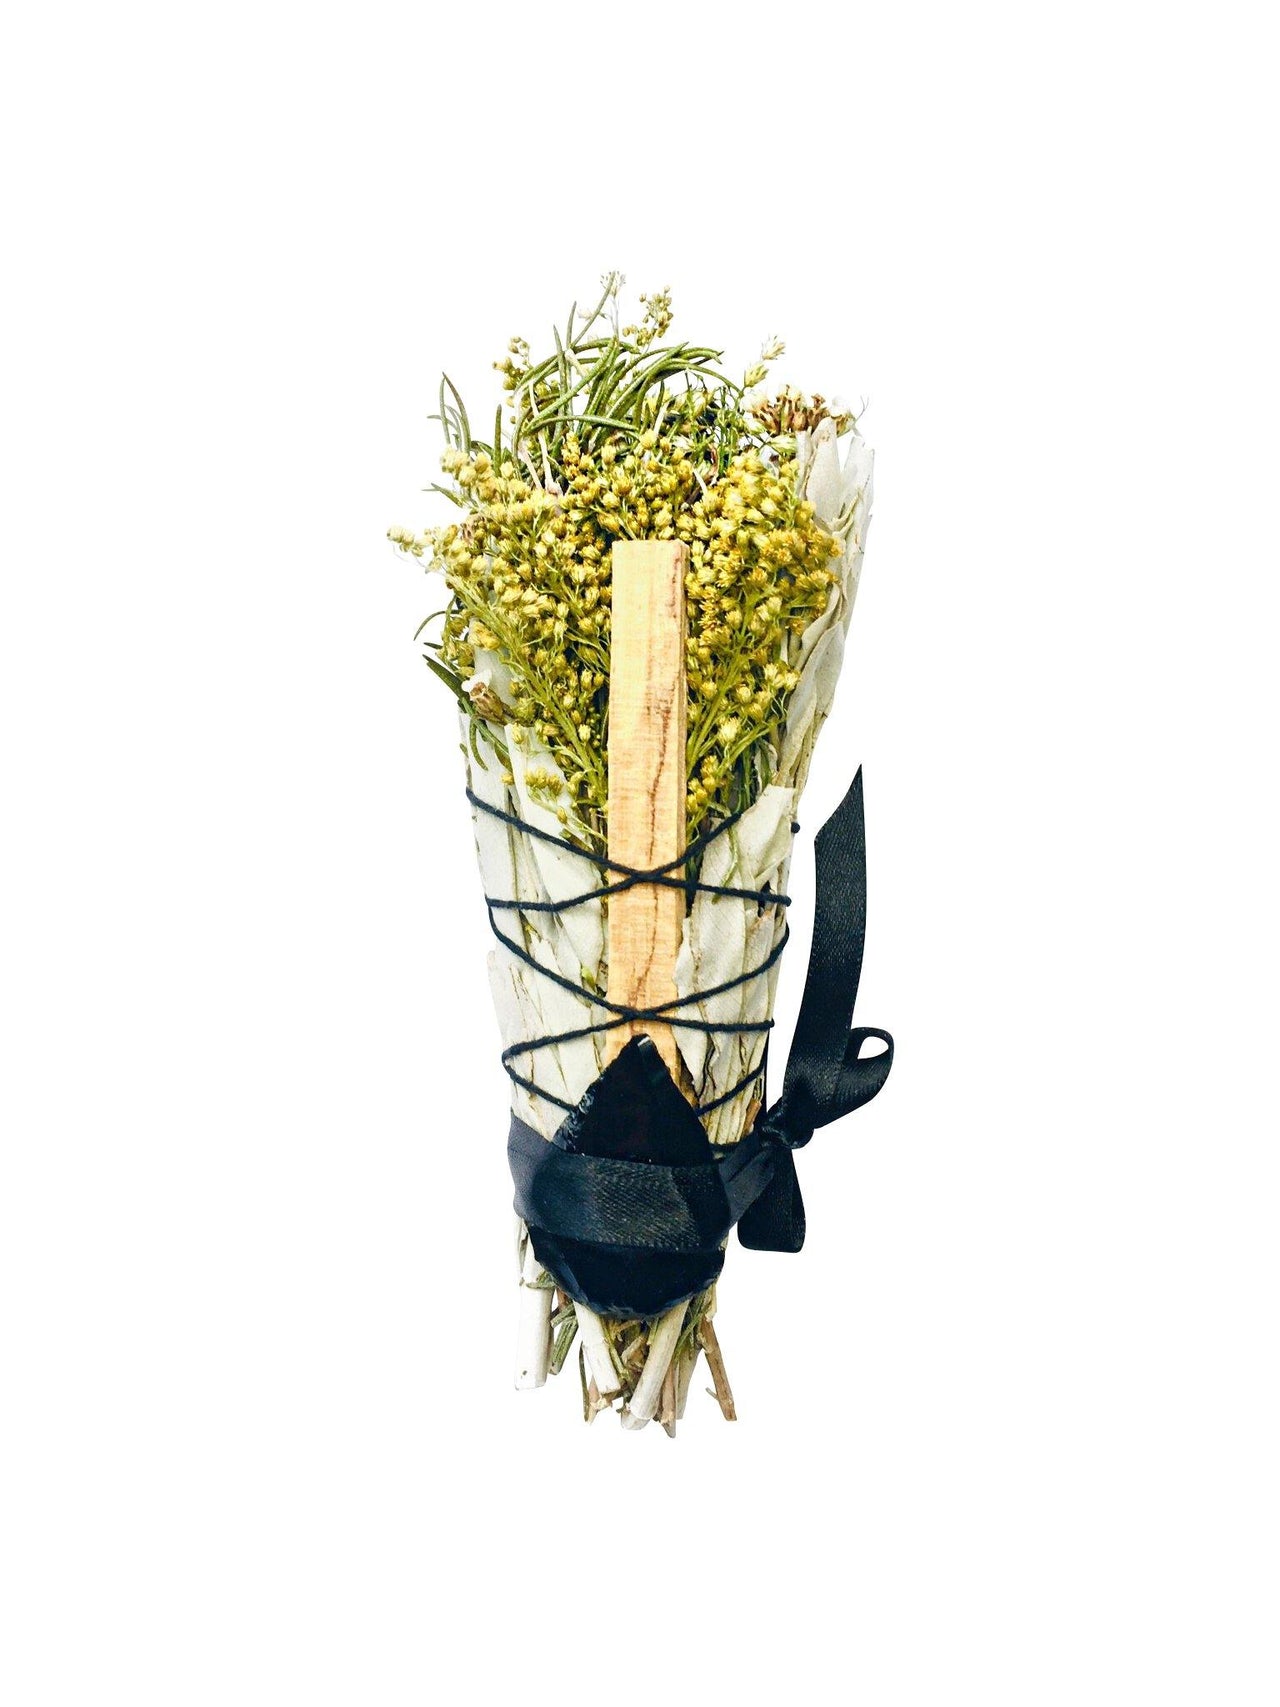 Protection - Black Obsidian, Rosemary, Palo Santo & Sage Smudge Stick Bouquet - Sentient Creations